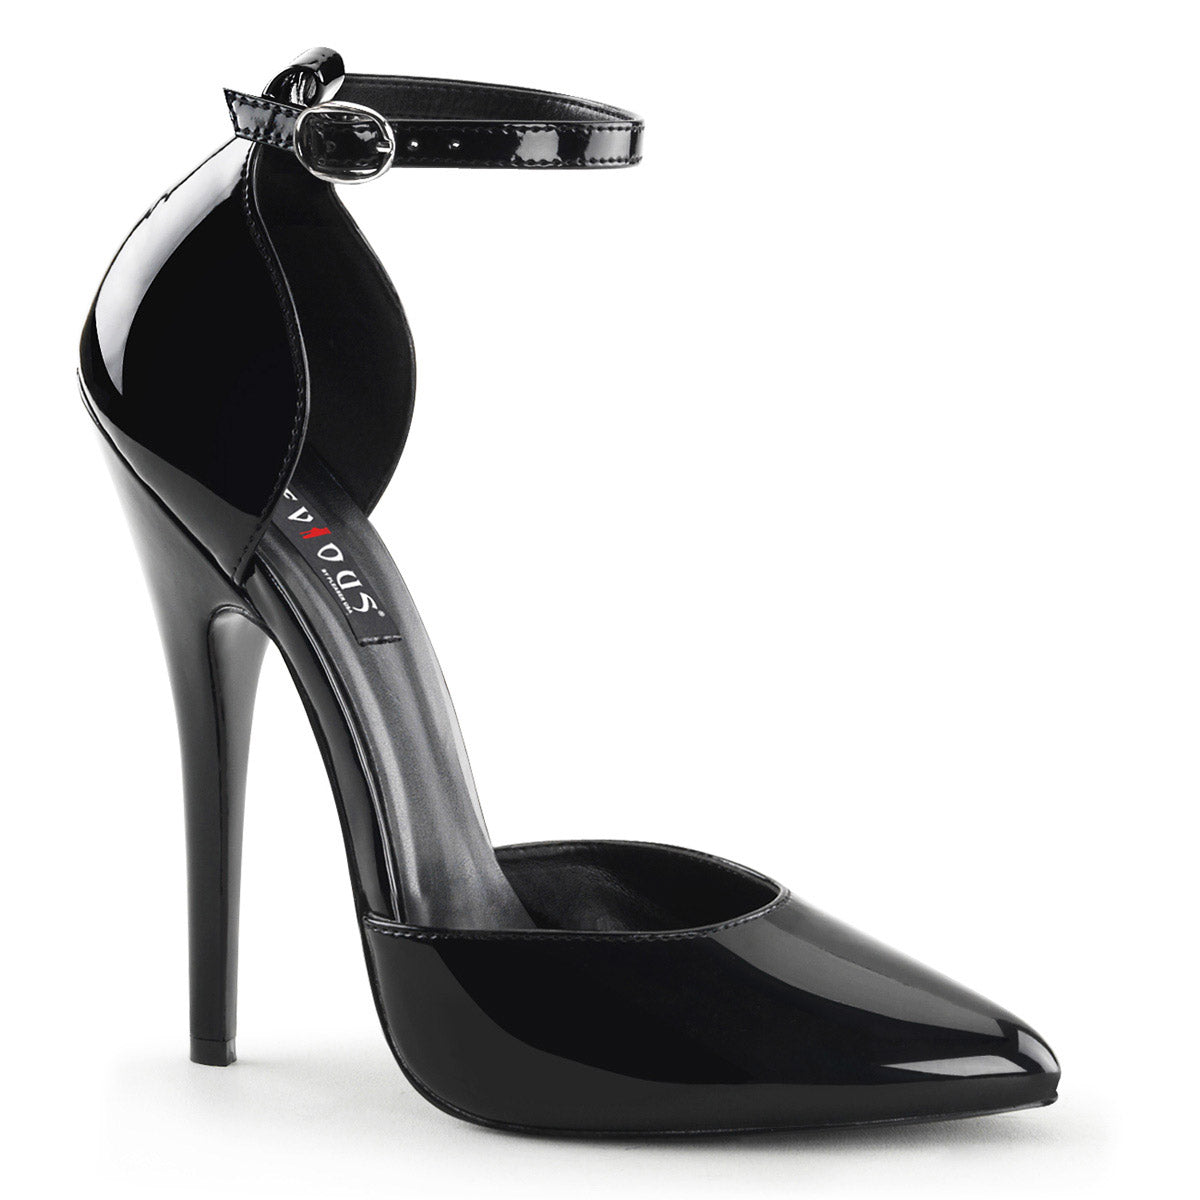 Sexy Pointed Toe Ankle Strap D'Orsay Pumps Stiletto High Heels Shoes Pleaser Devious DOMINA/402